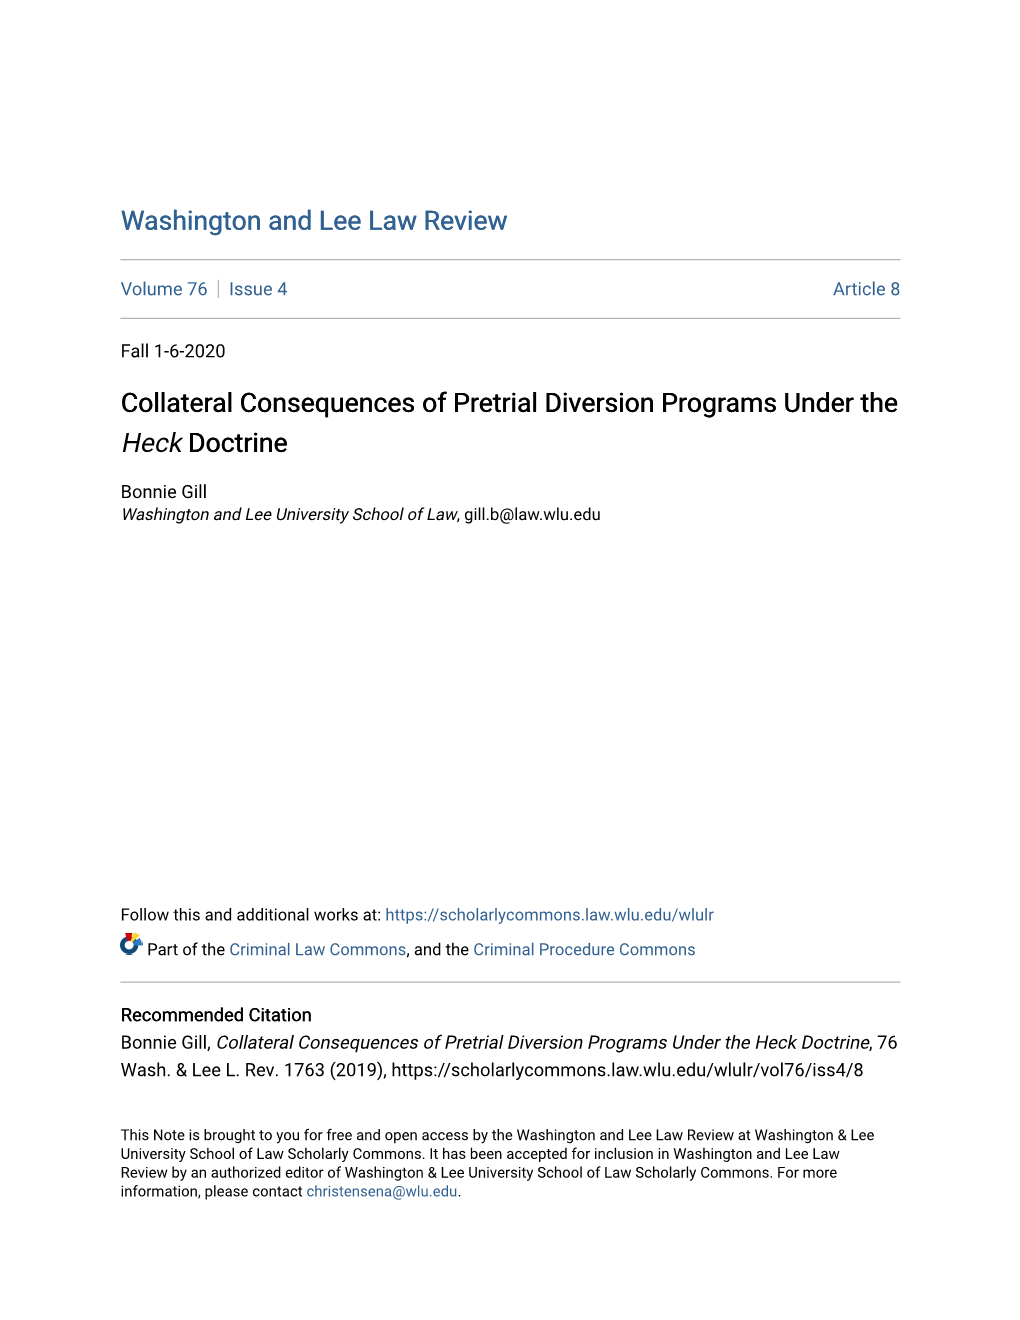 Collateral Consequences of Pretrial Diversion Programs Under the &lt;Em